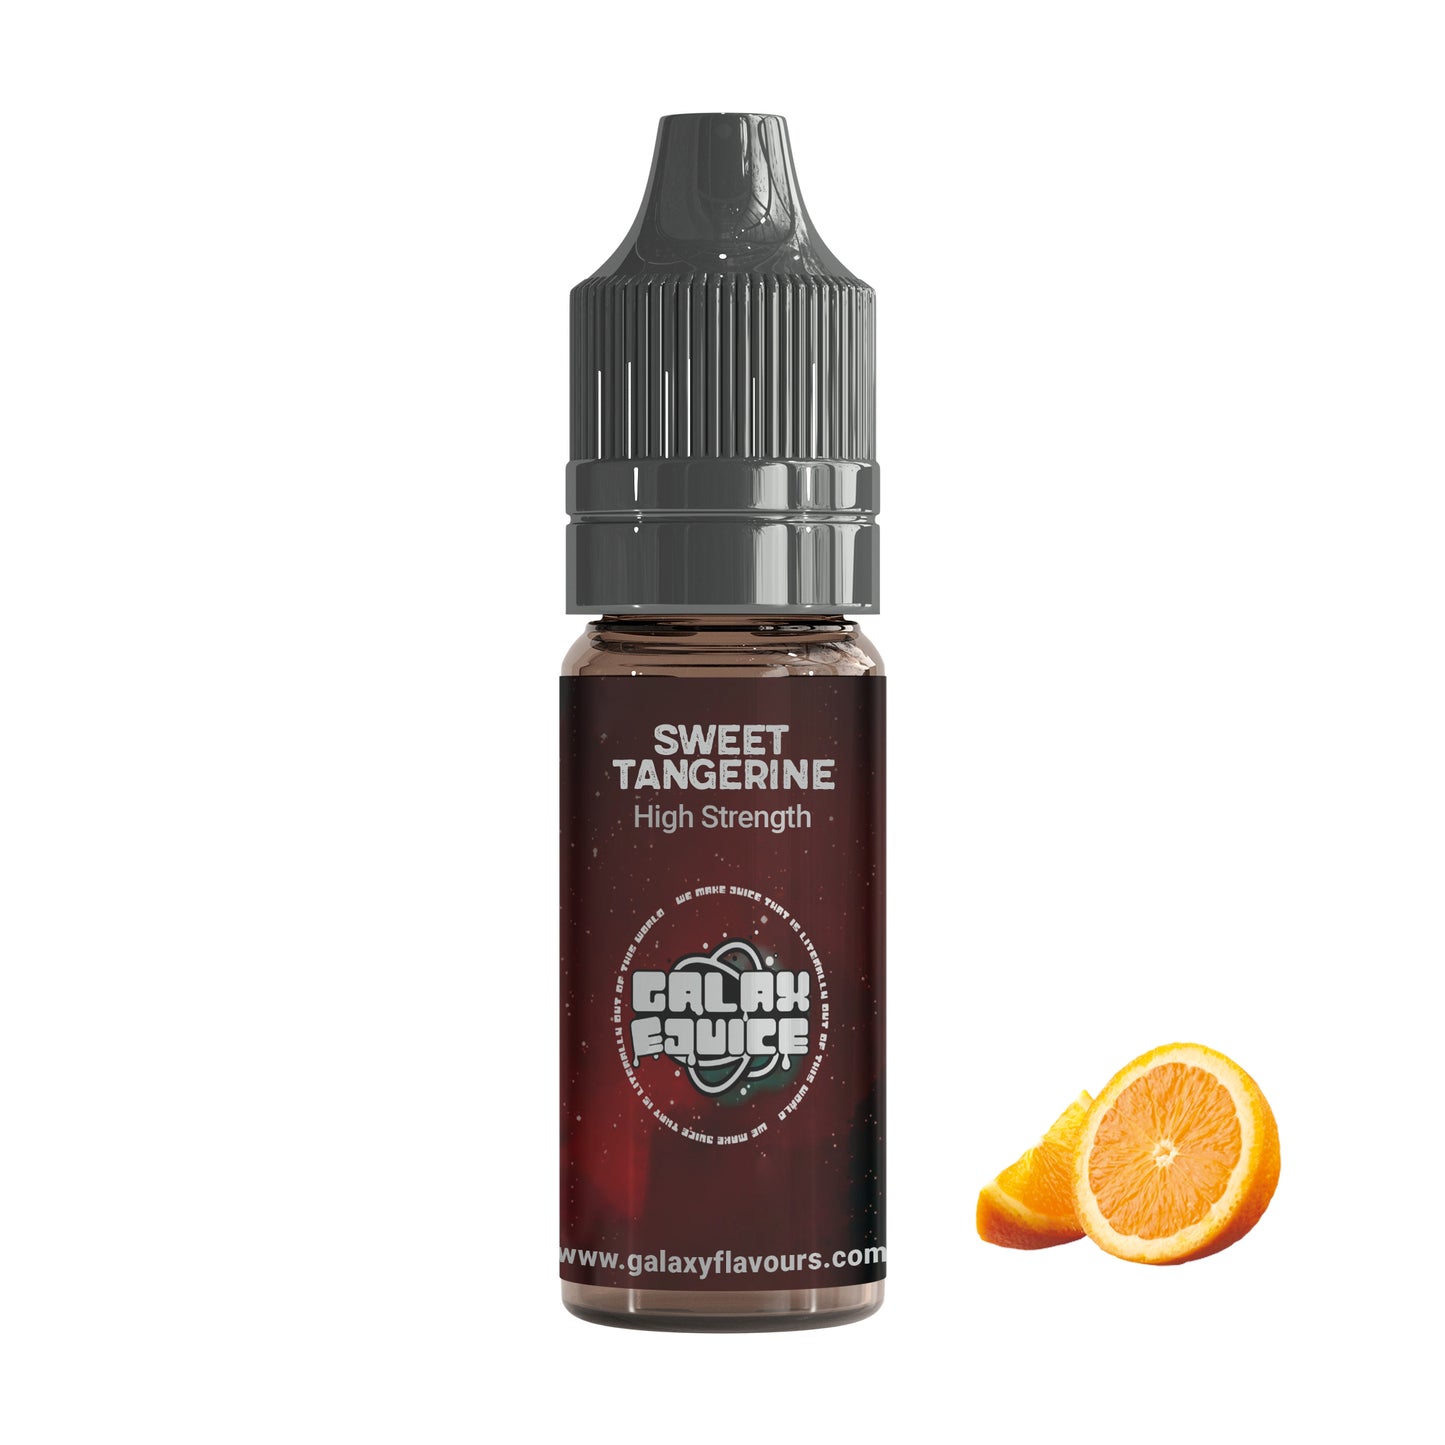 Sweet Tangerine High Strength Professional Flavouring.